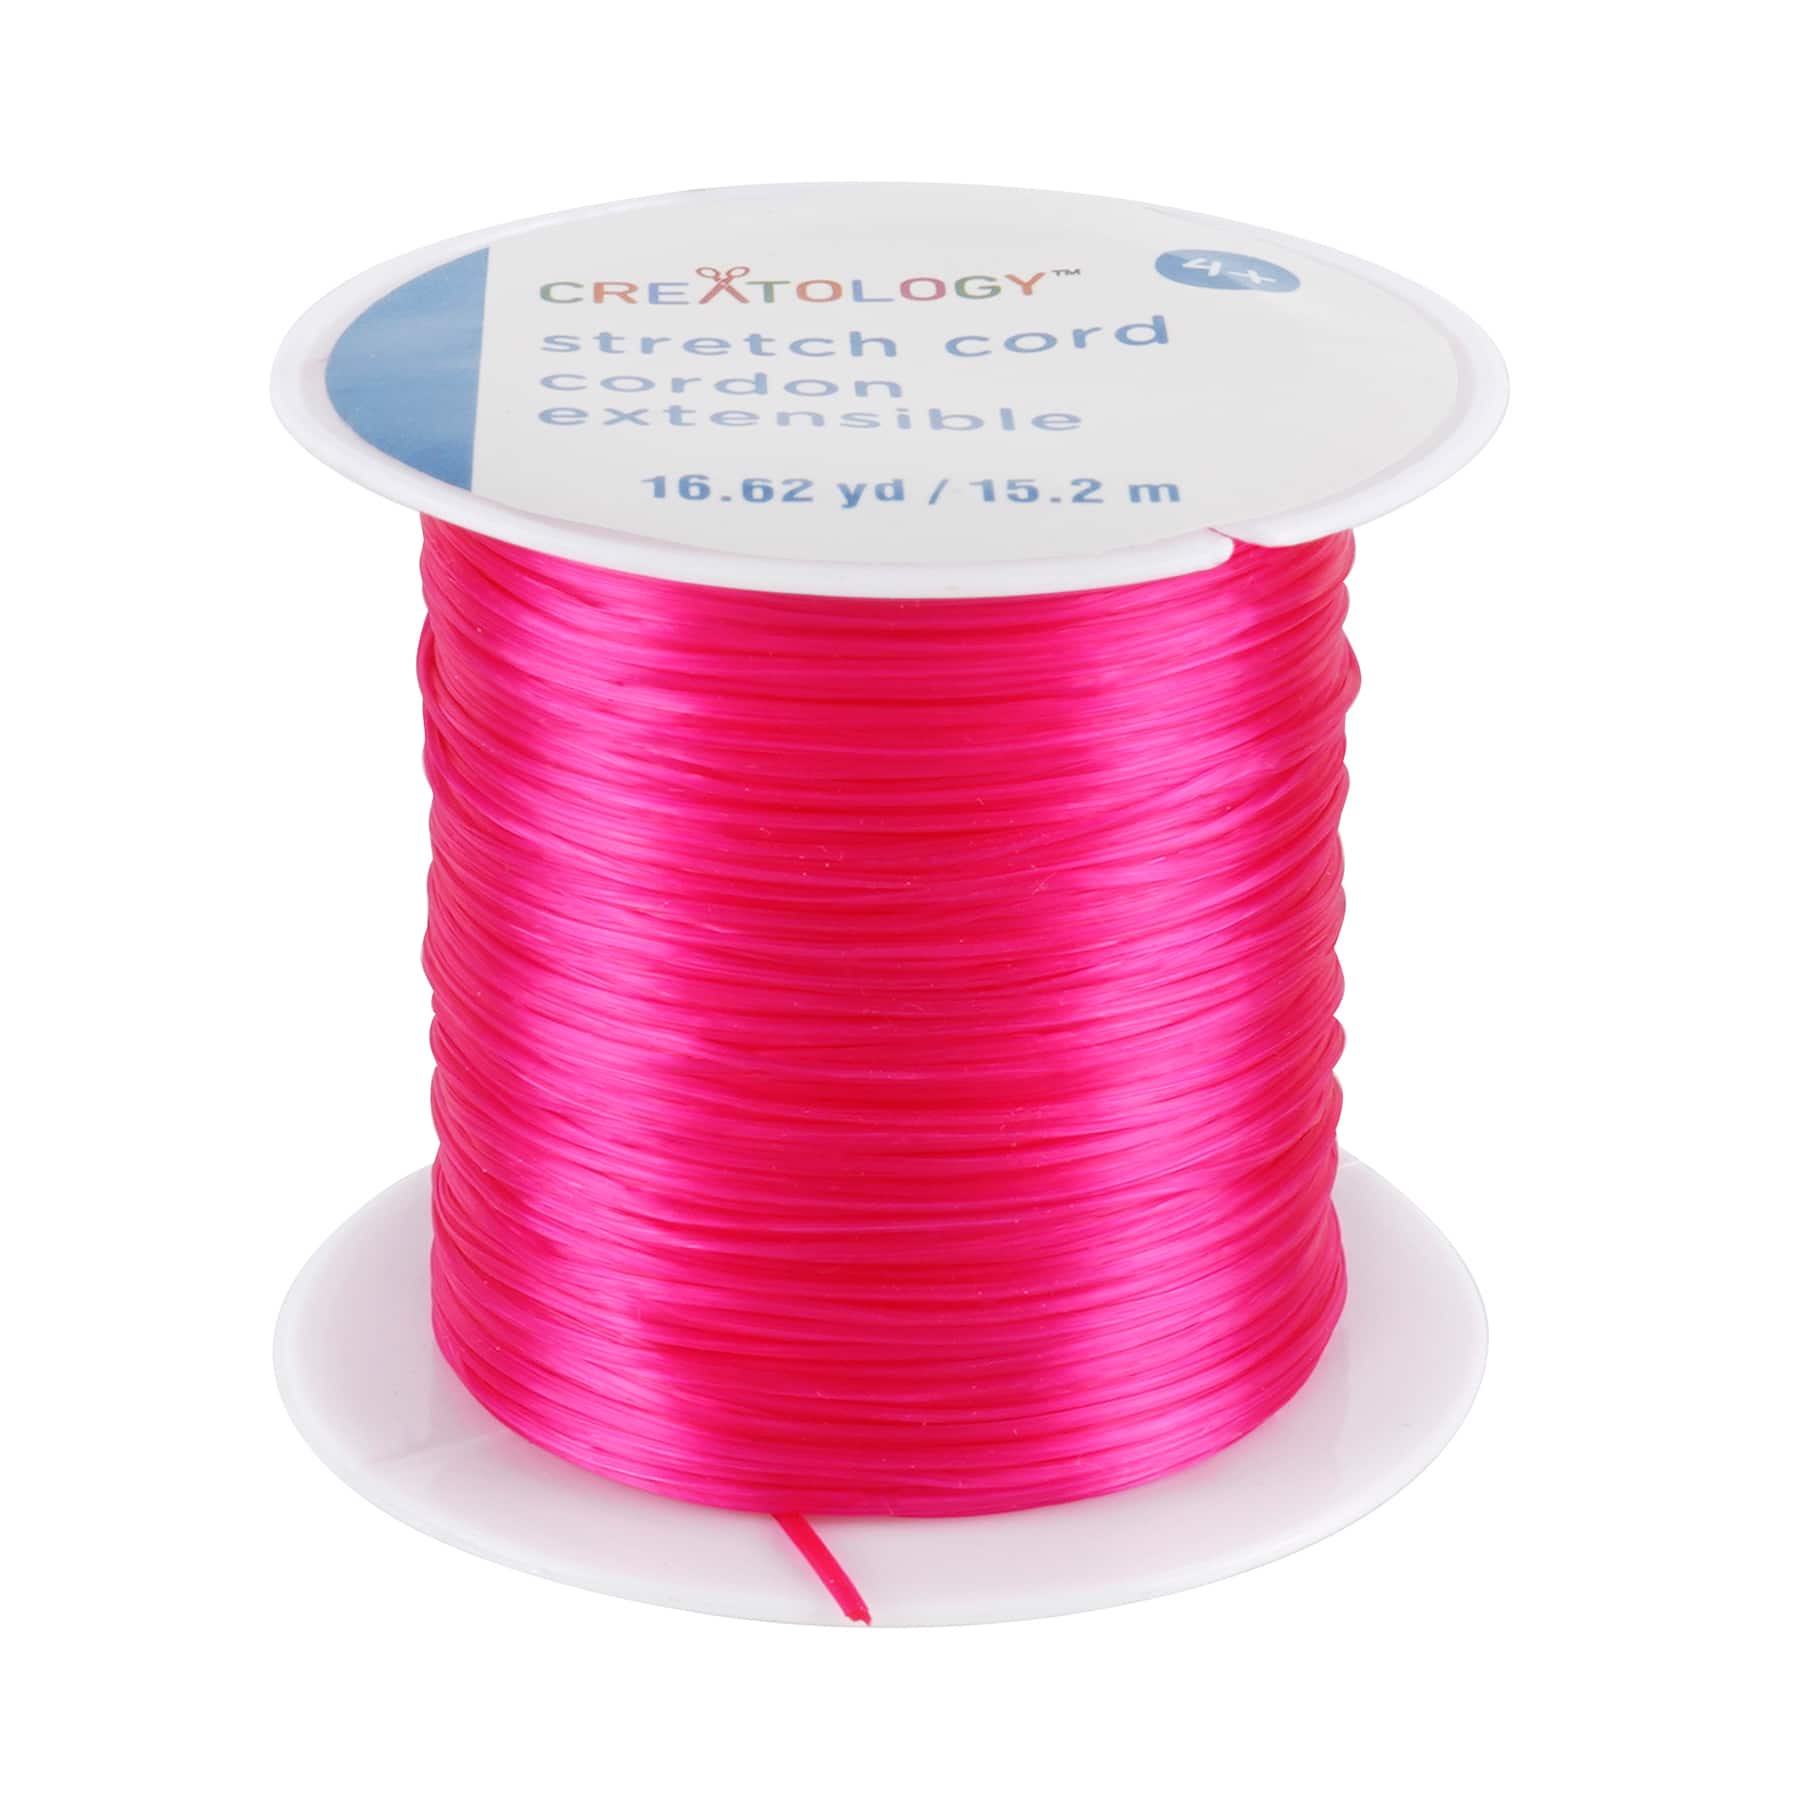 Mandala Crafts 1mm Hot Pink Elastic Cord for Bracelets Necklaces - 109 Yds  Hot Pink Elastic String Stretchy Cord for Jewelry Making Beading - Stretch